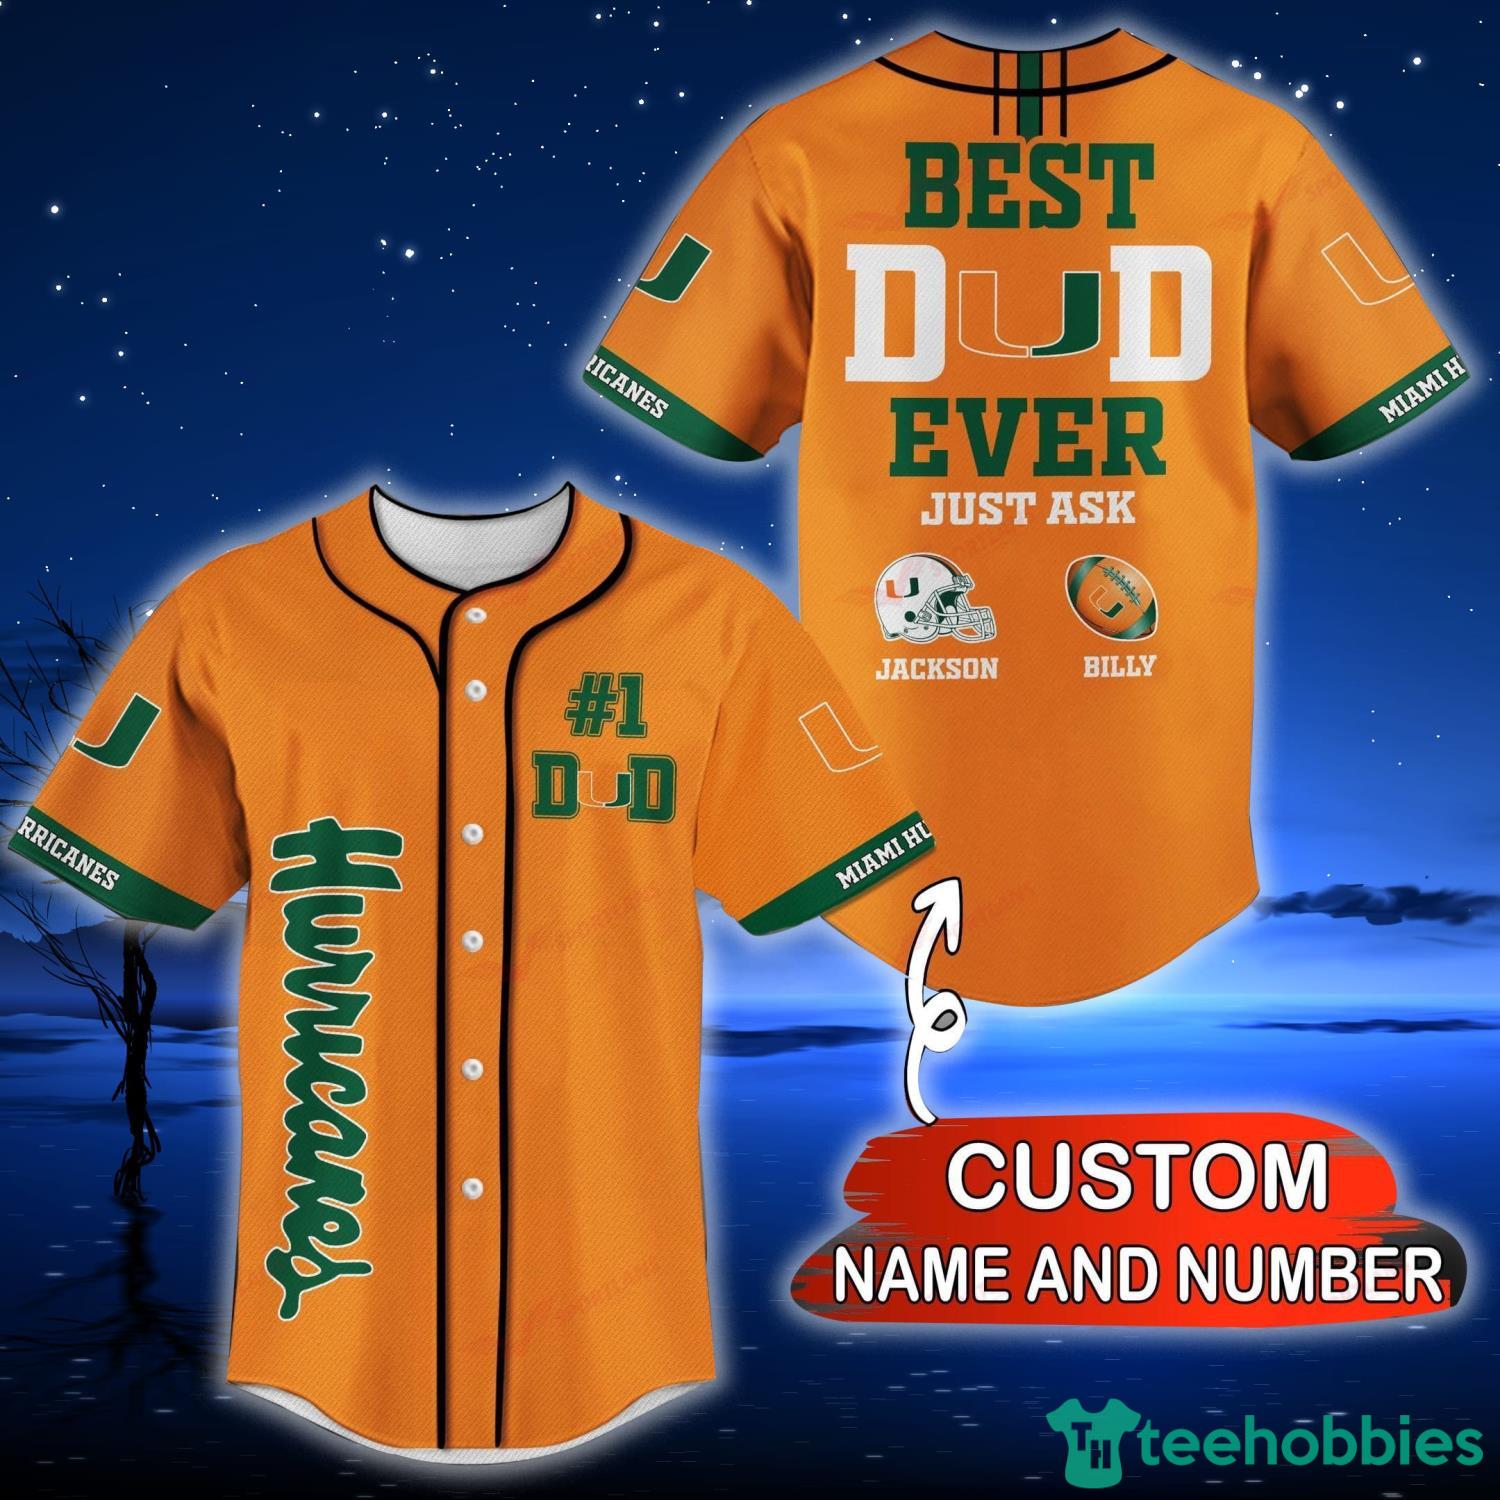 Best Miami Hurricanes Baseball Jersey for sale in Fairview, Tennessee for  2023